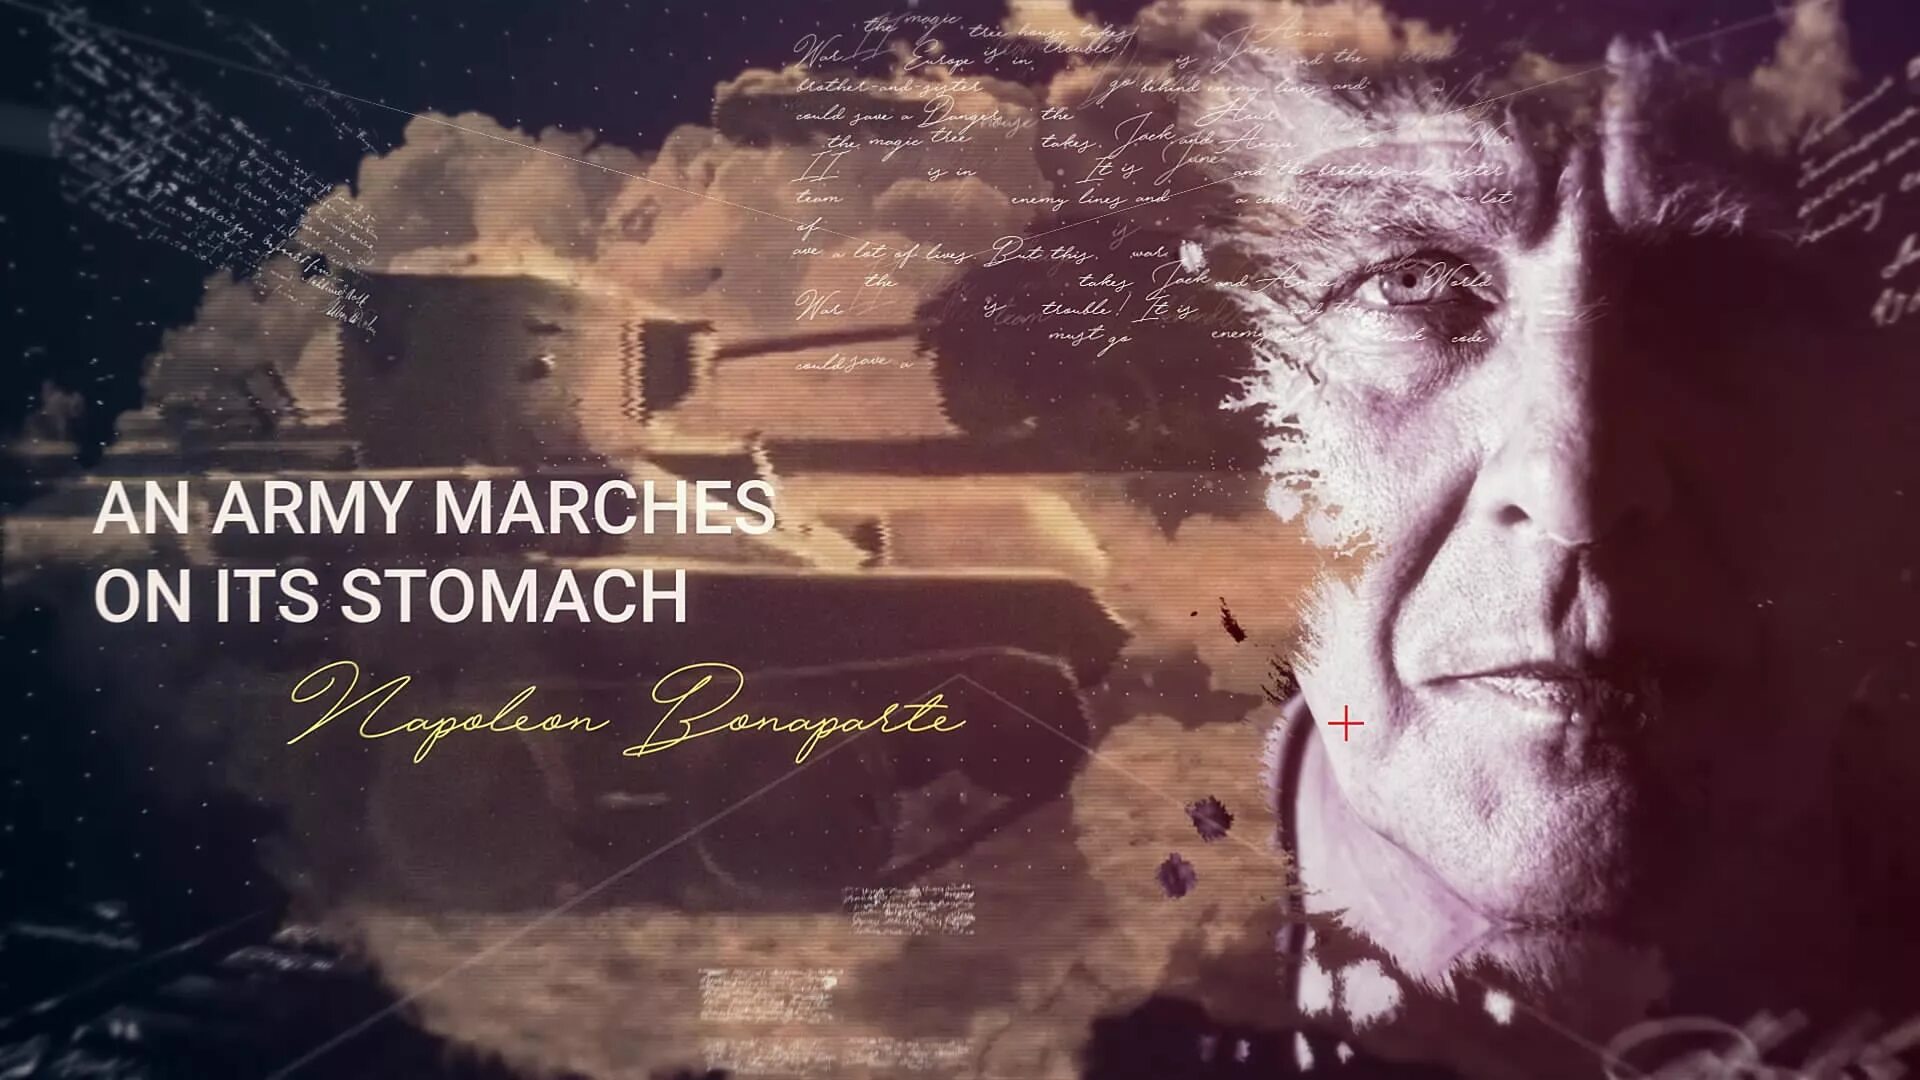 History after Effects. History after Effects Template. Videohive Opener. AE Plugins. Story effects